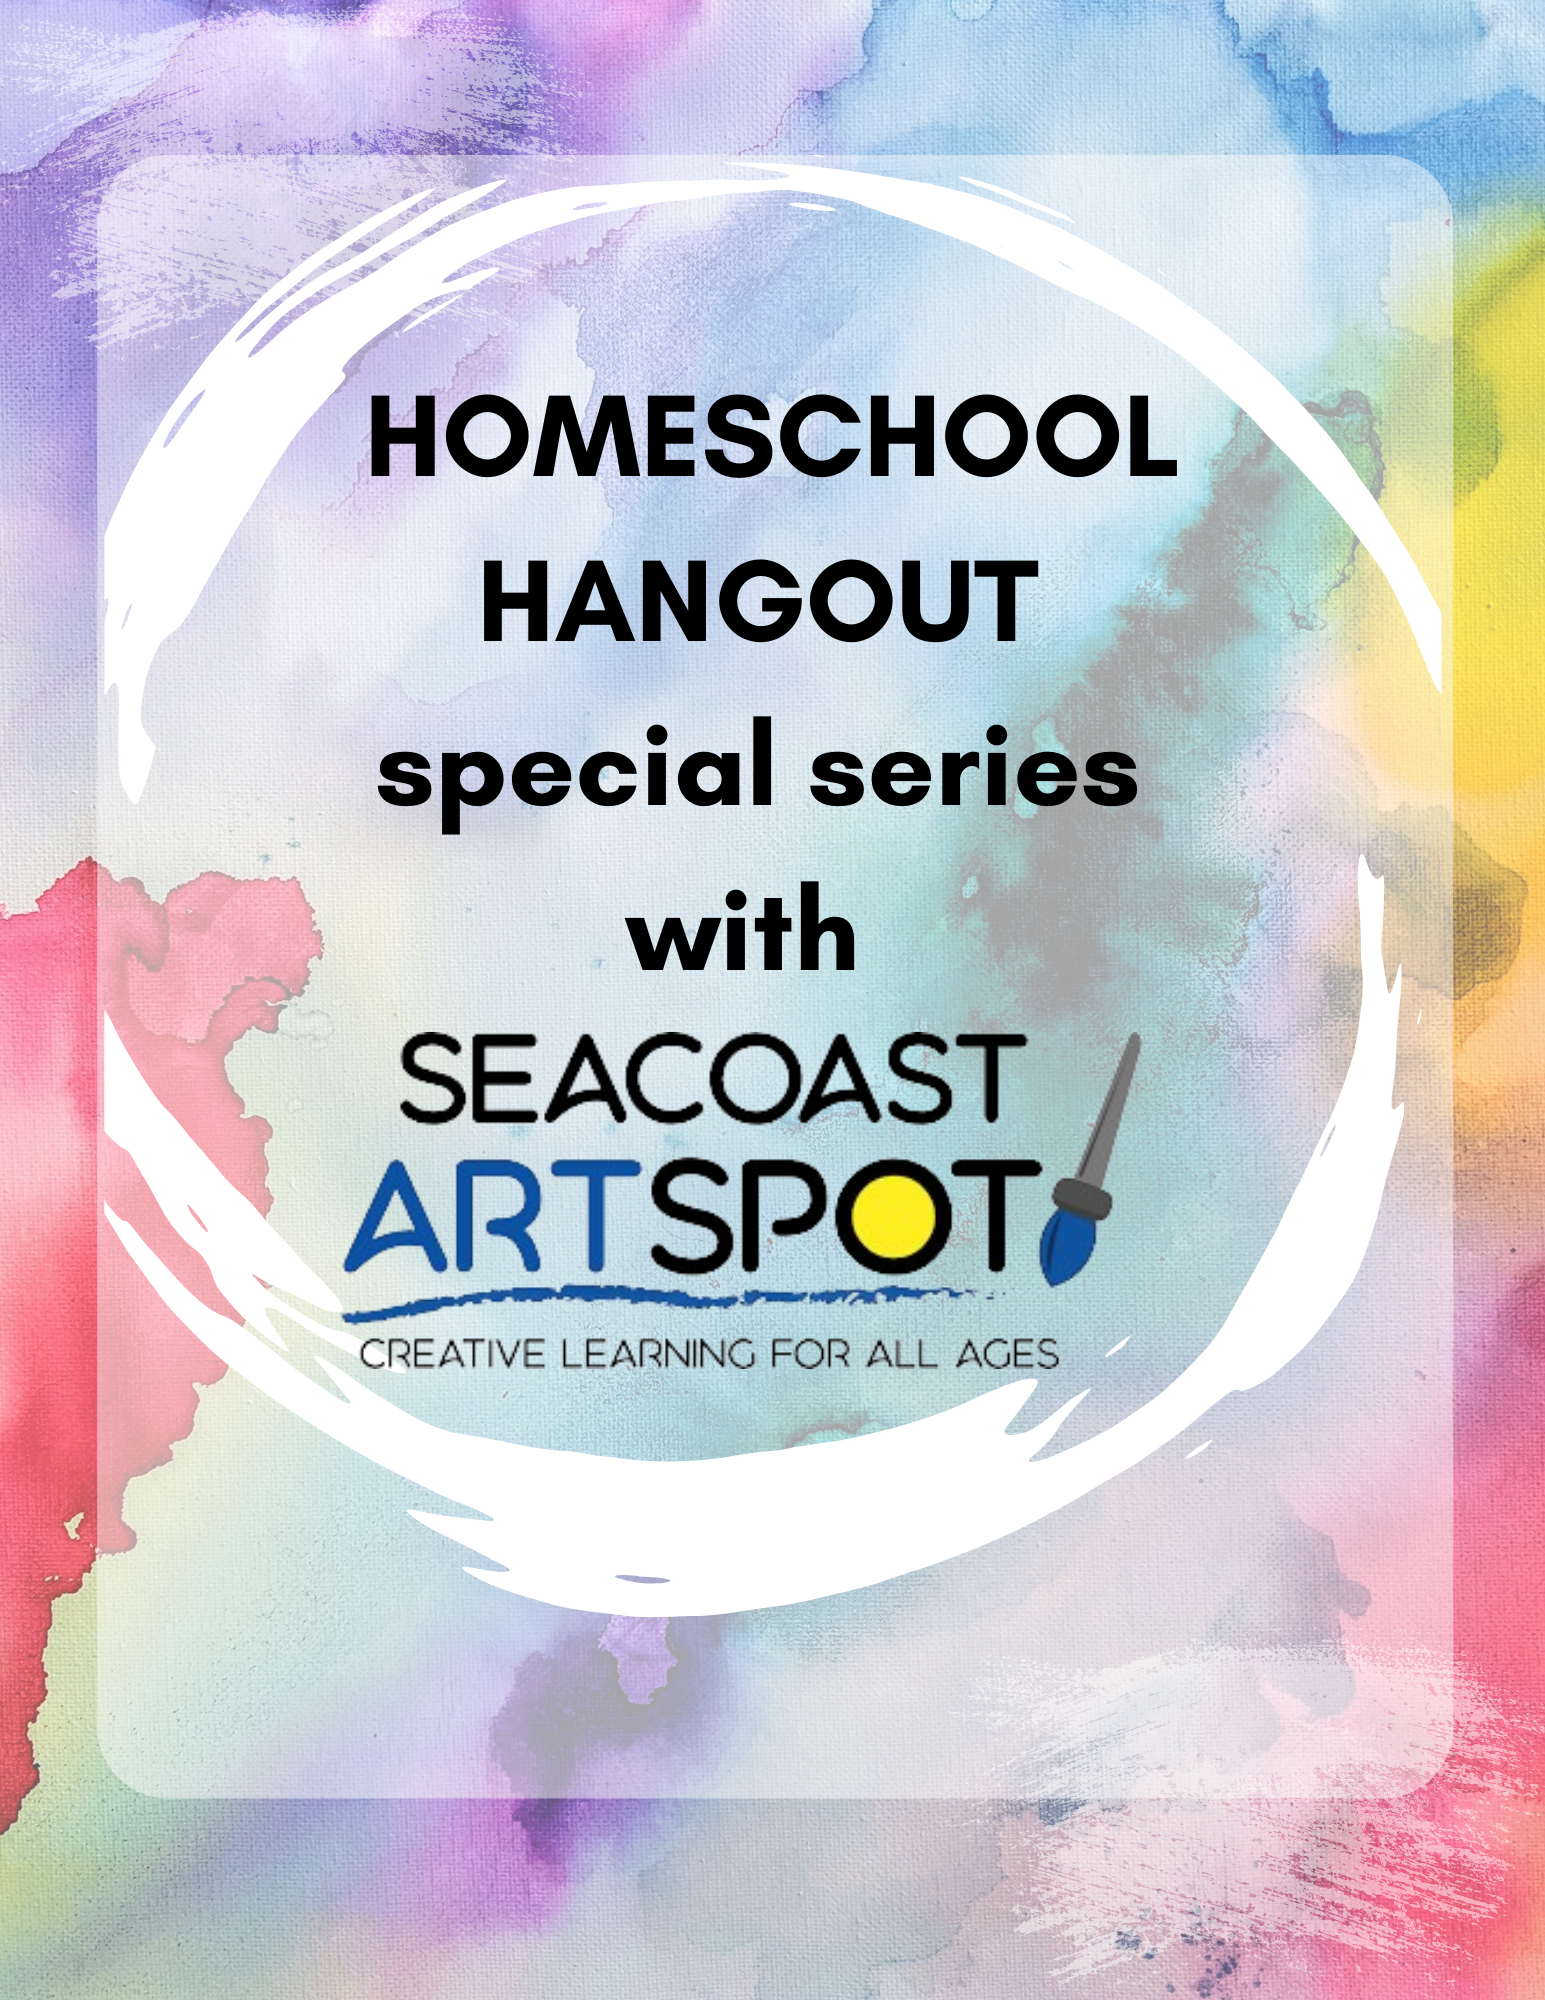 Homeschool Hangout special series with Seacost Art Spot